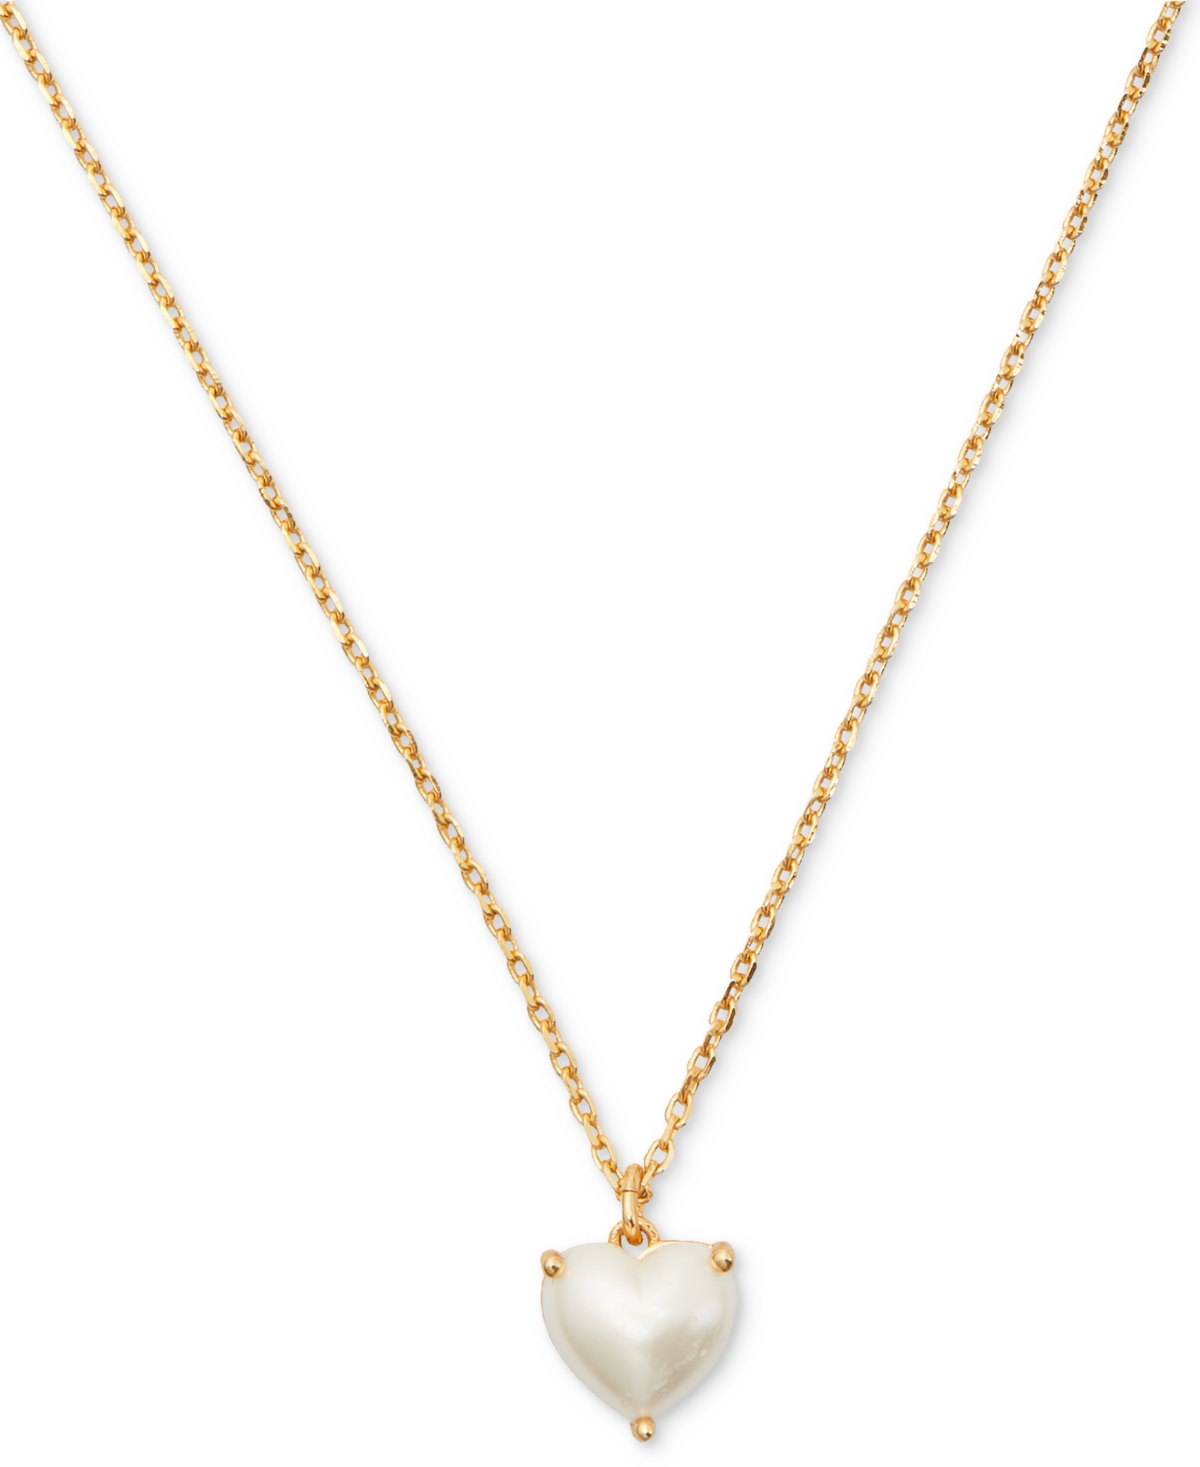 Gold-Tone Birthstone Heart Pendant Necklace, 16" + 3" extender - Pearl